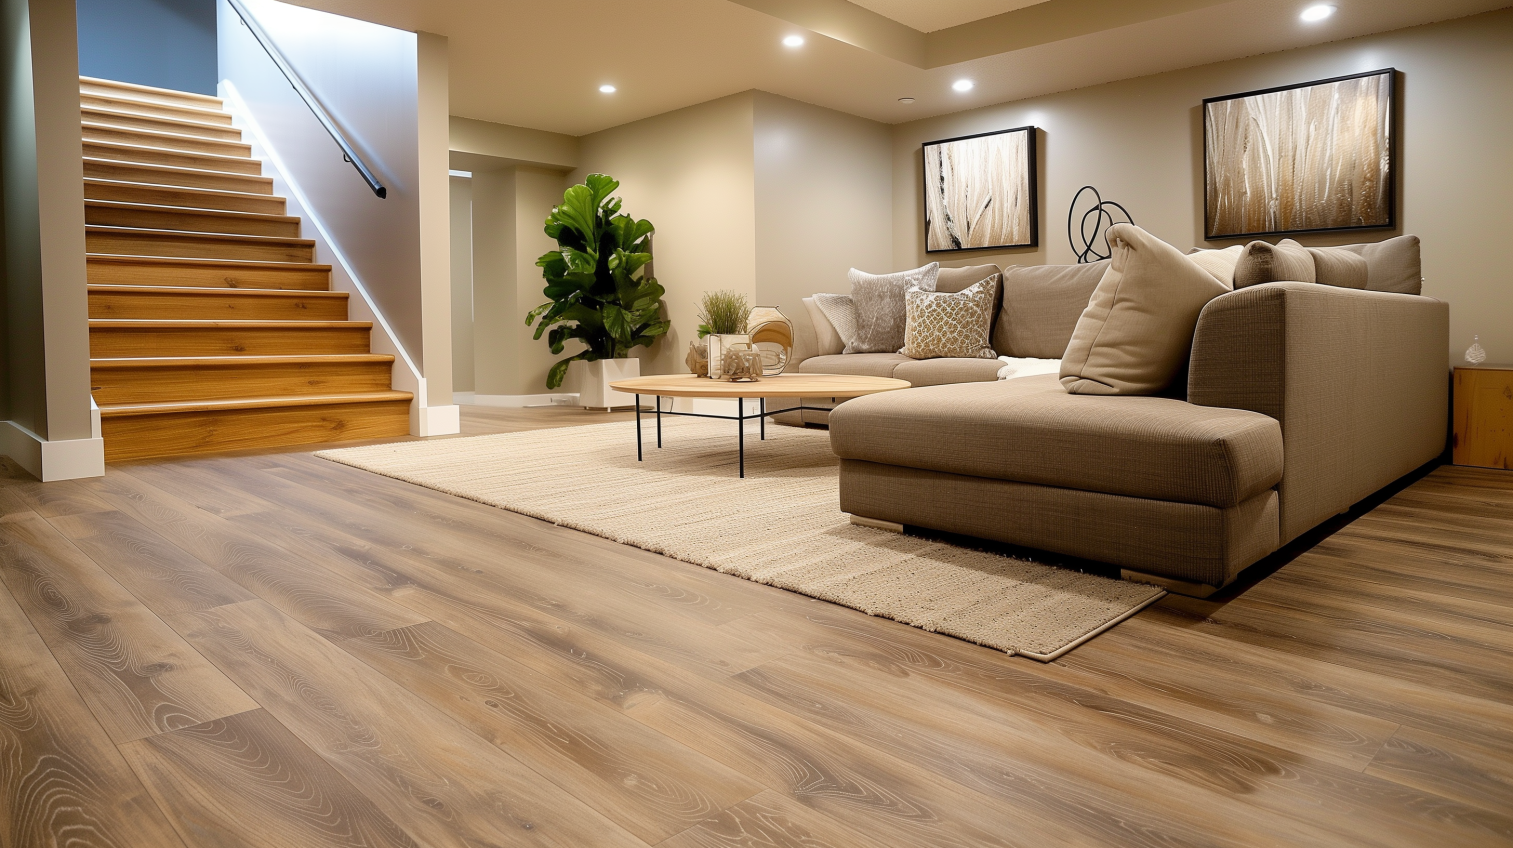 about Best Flooring for Basements